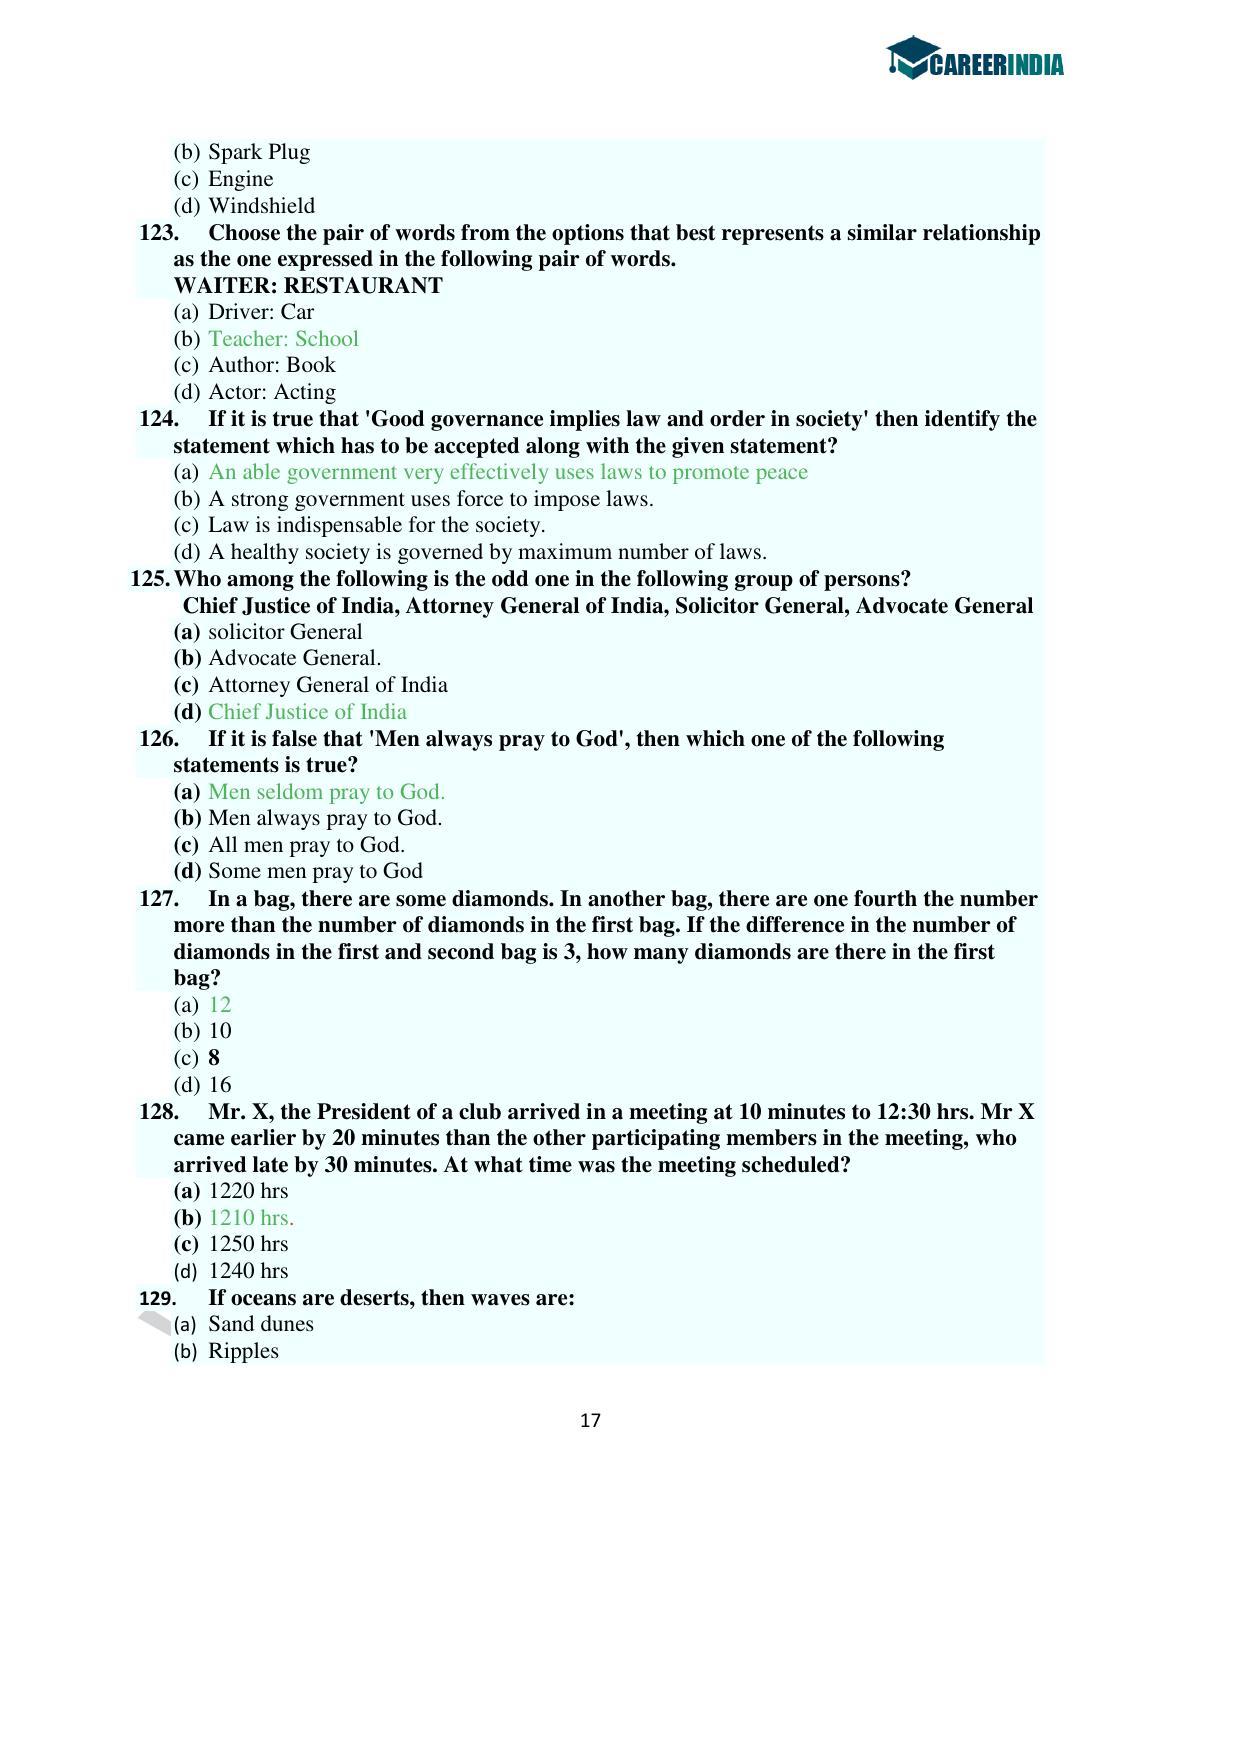 CLAT 2016 UG Question Paper with Answer Key - Page 17